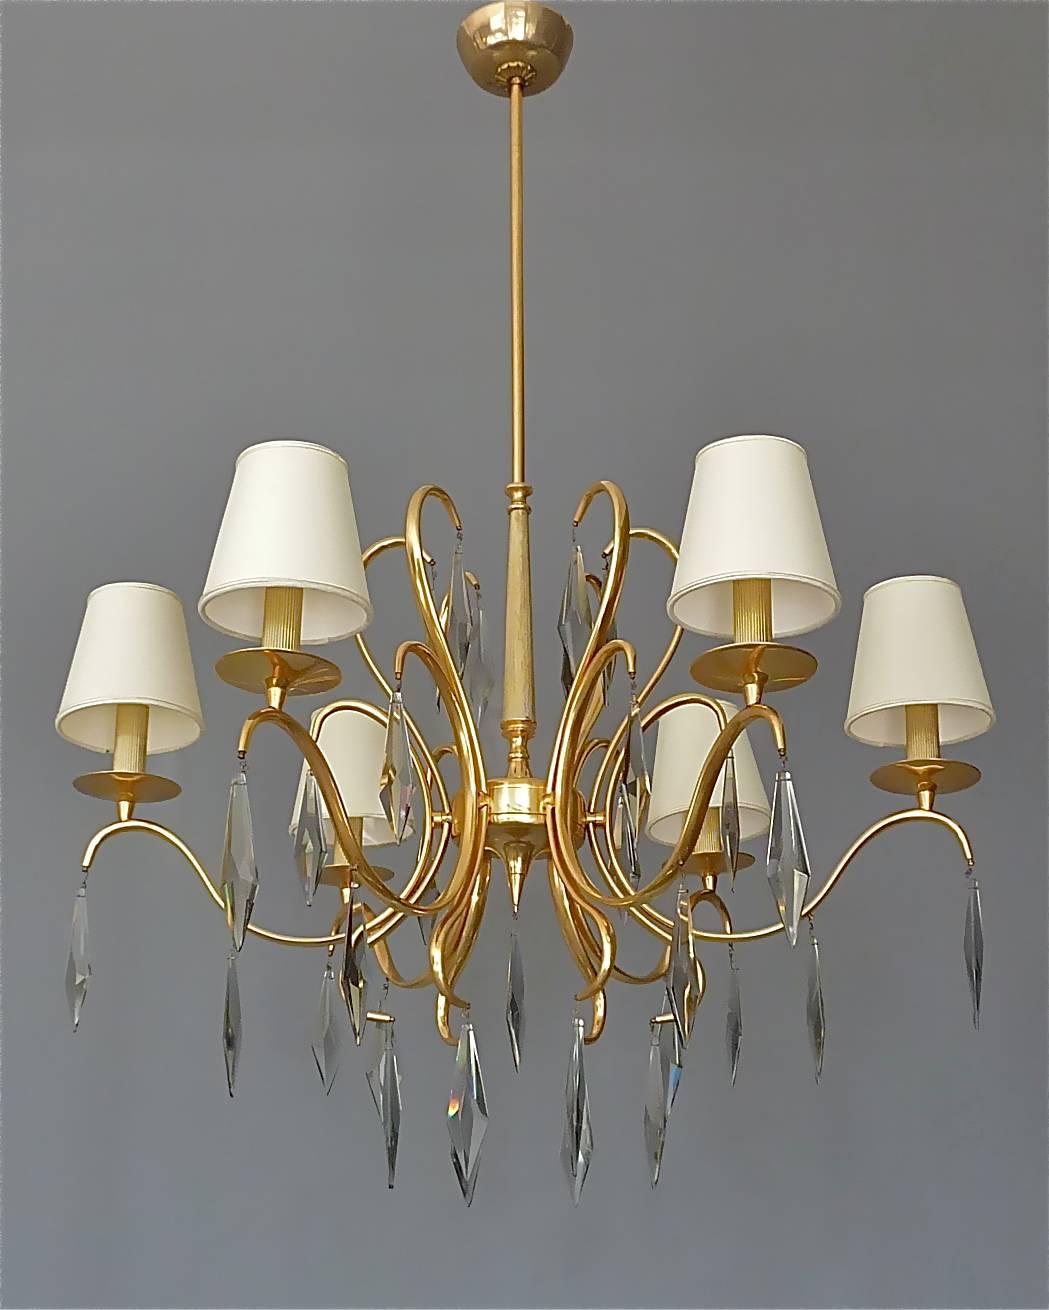 Large elegant and fabulous of vintage Italian six-light chandelier in gilt brass metal with smokey-grey faceted Murano crystal glass, possibly made by Sciolari, Italy, circa 1970s. The wonderful manufactured and precious chandelier which has six